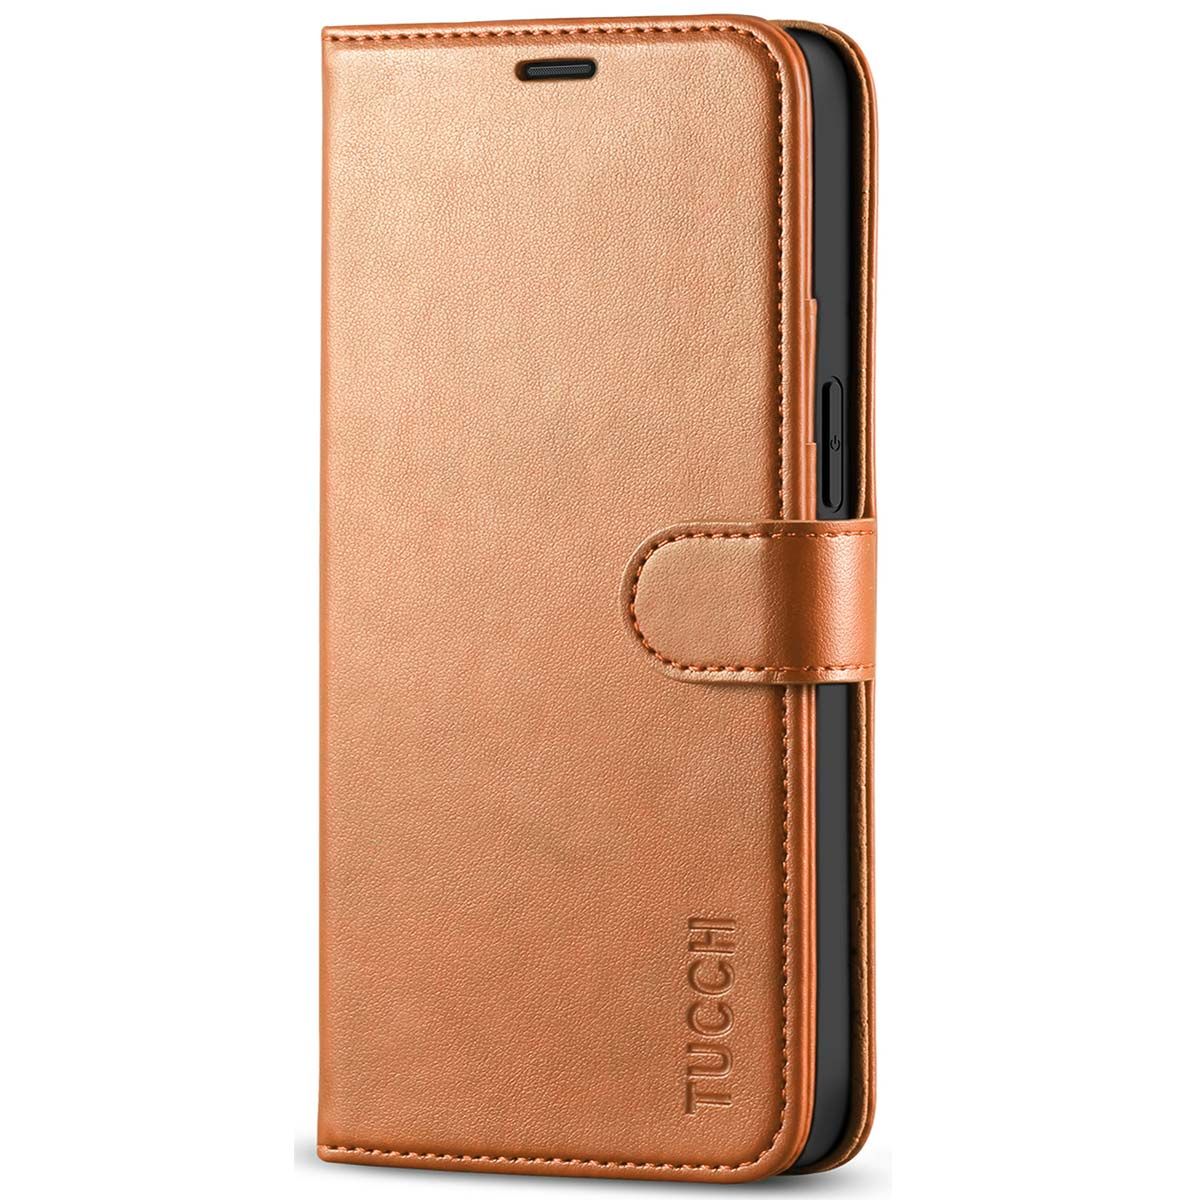 iPhone 12 Leather Wallet Case – Tan